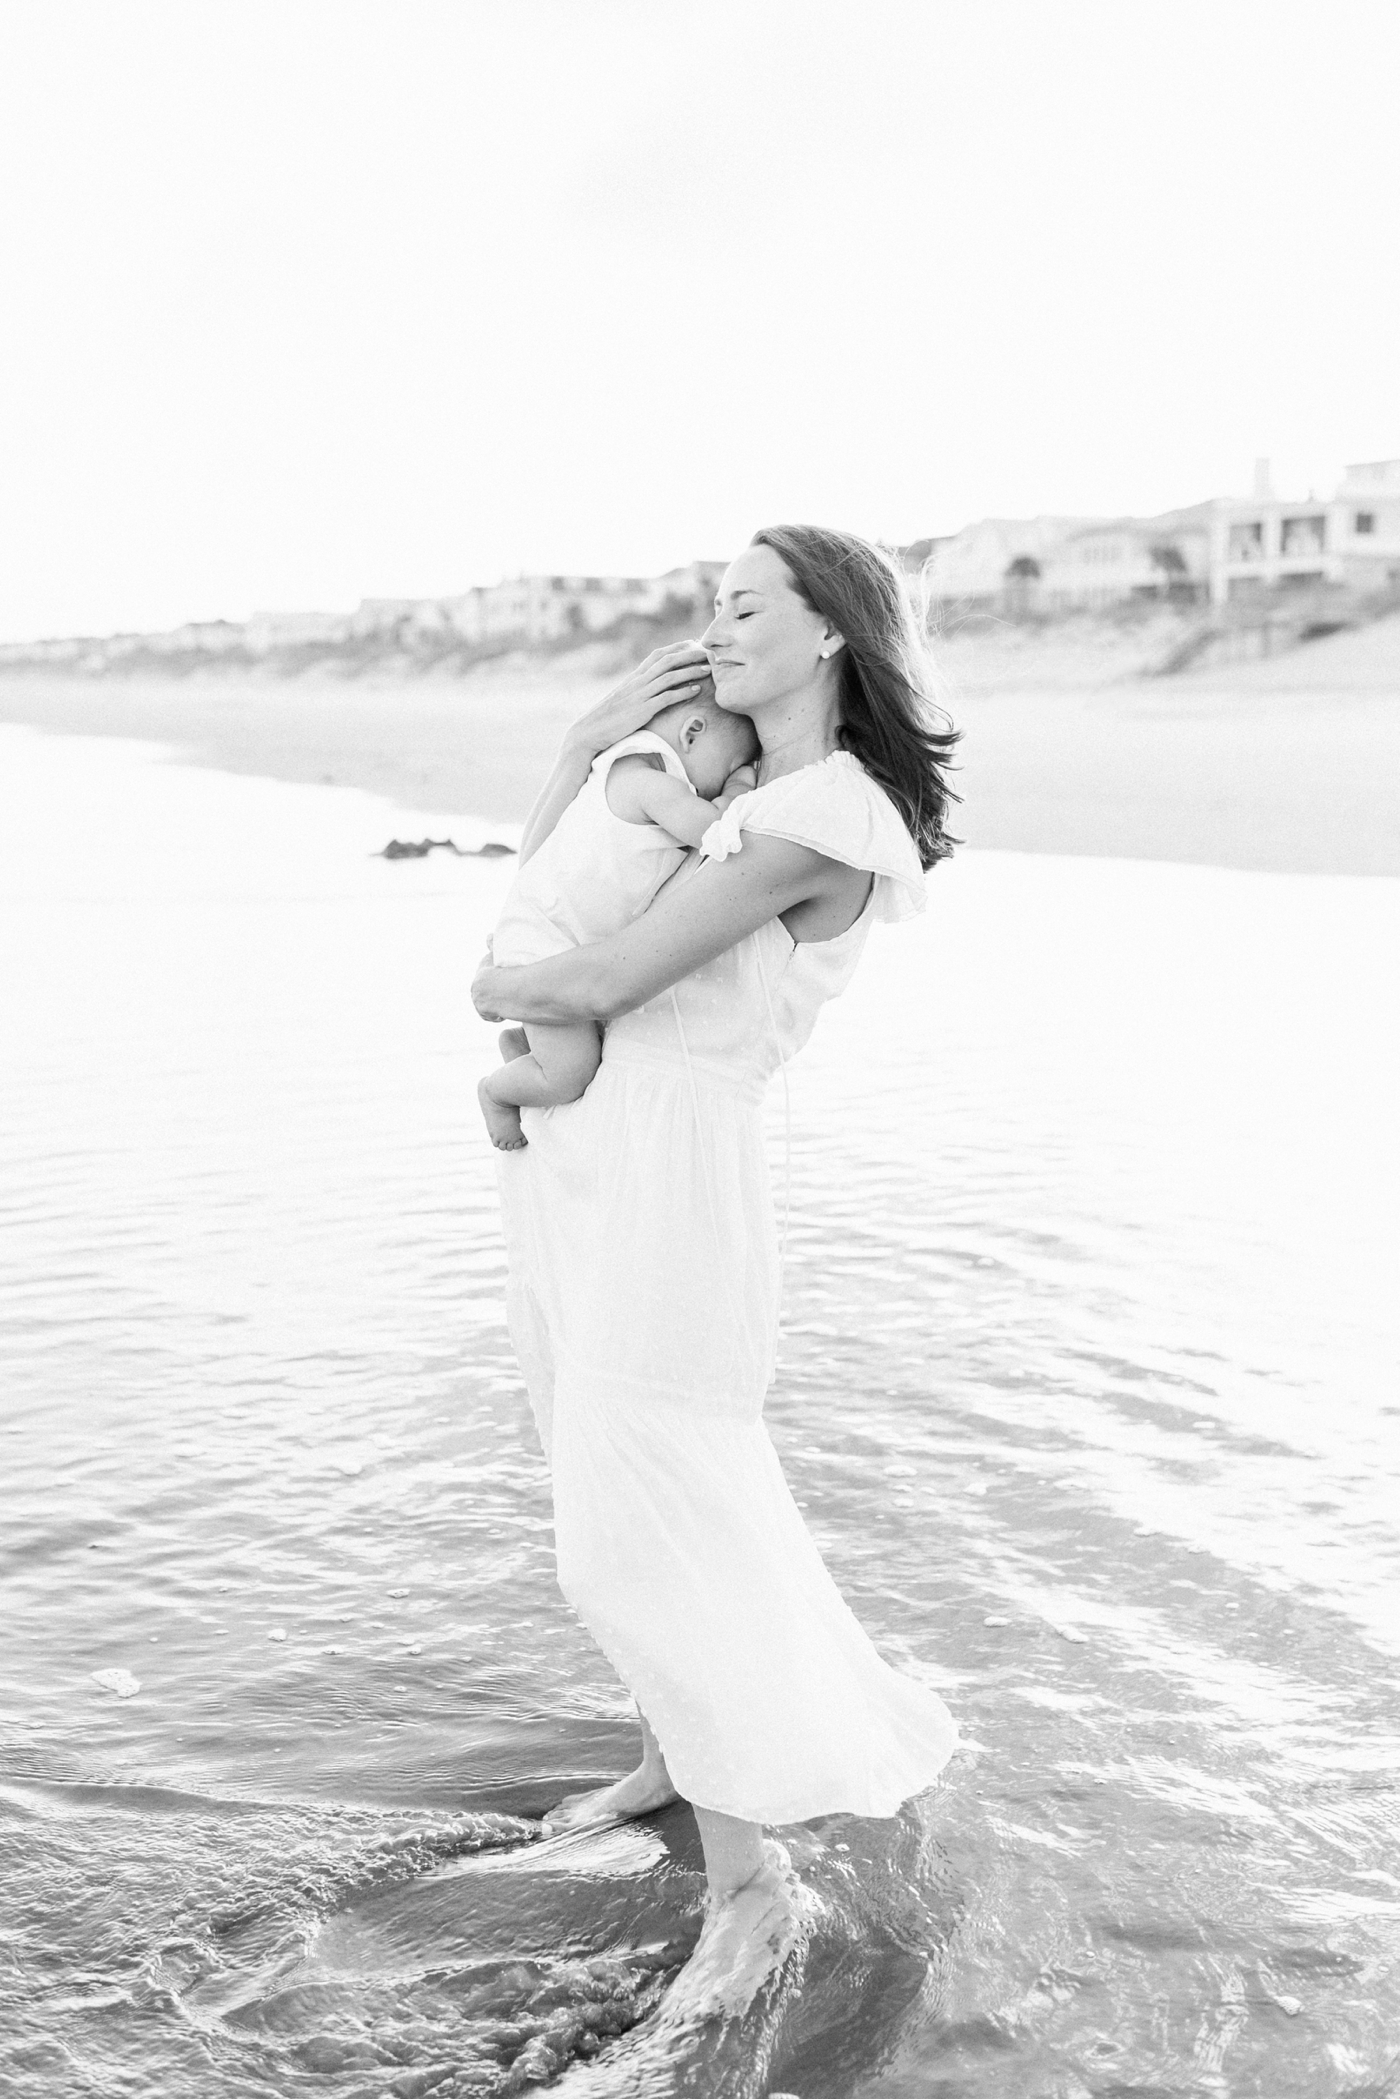 Mom snuggling her baby boy on the beach | Photo by Caitlyn Motycka Photography.